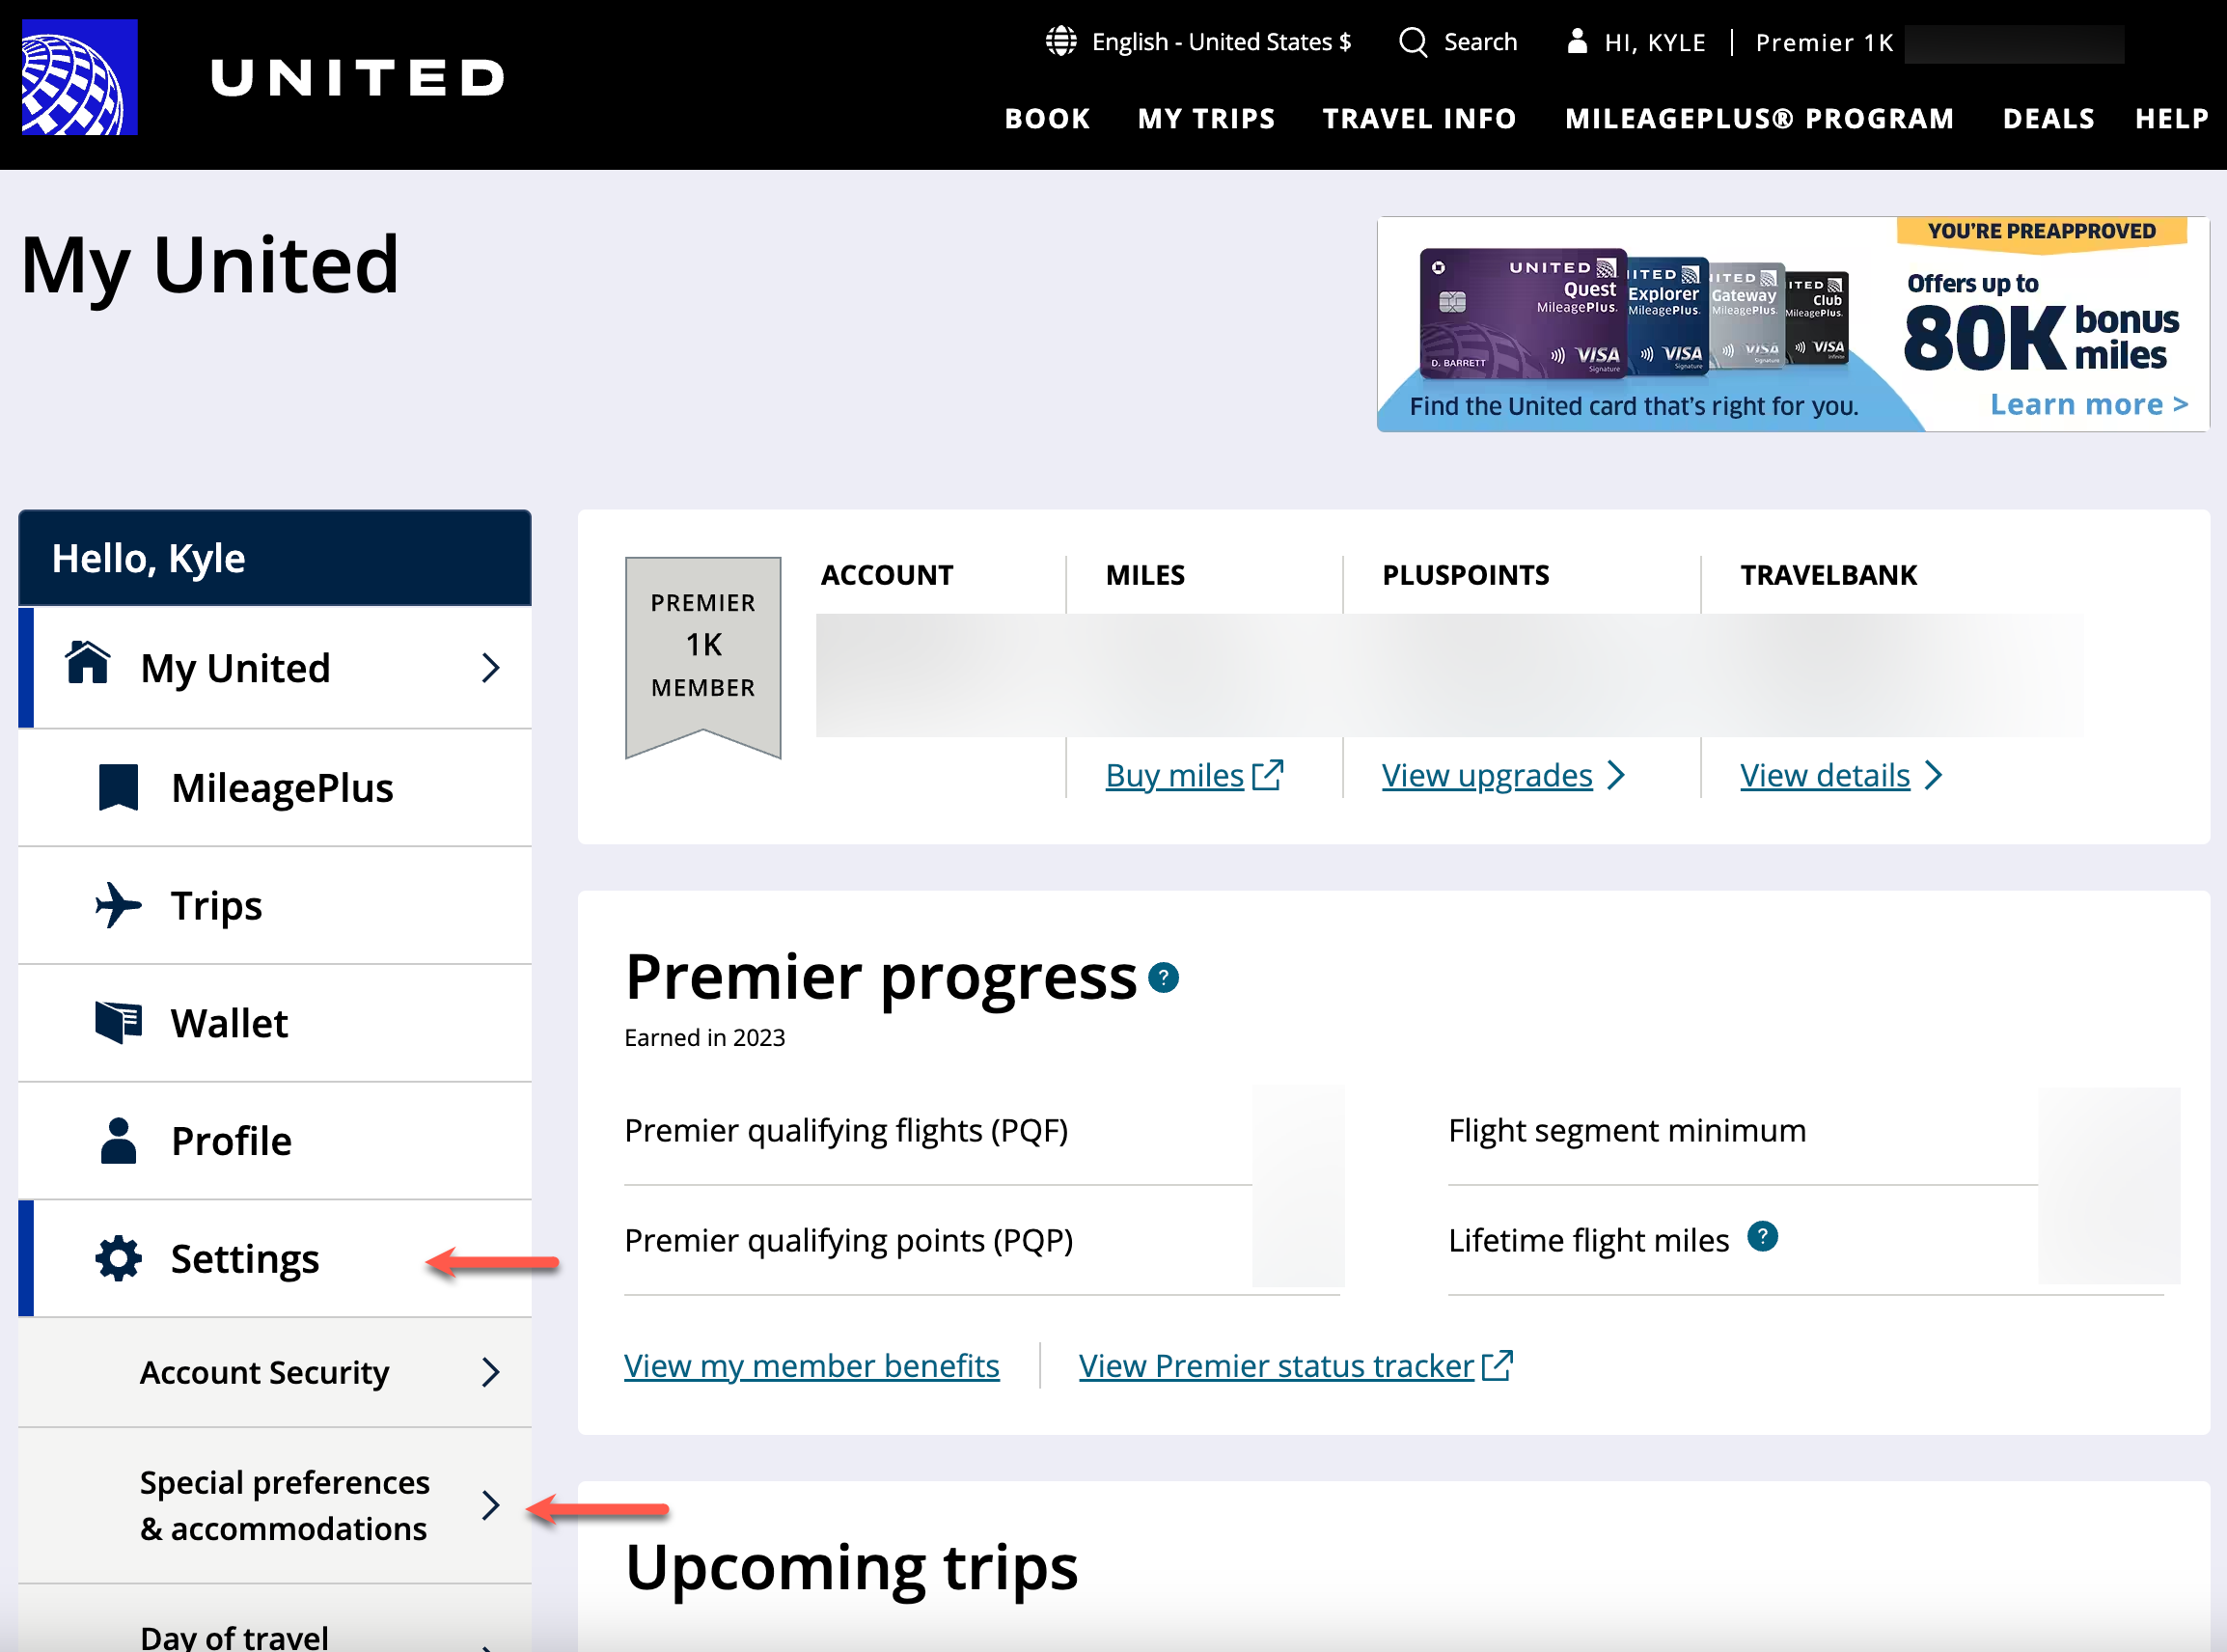 United special preferences and accommodations